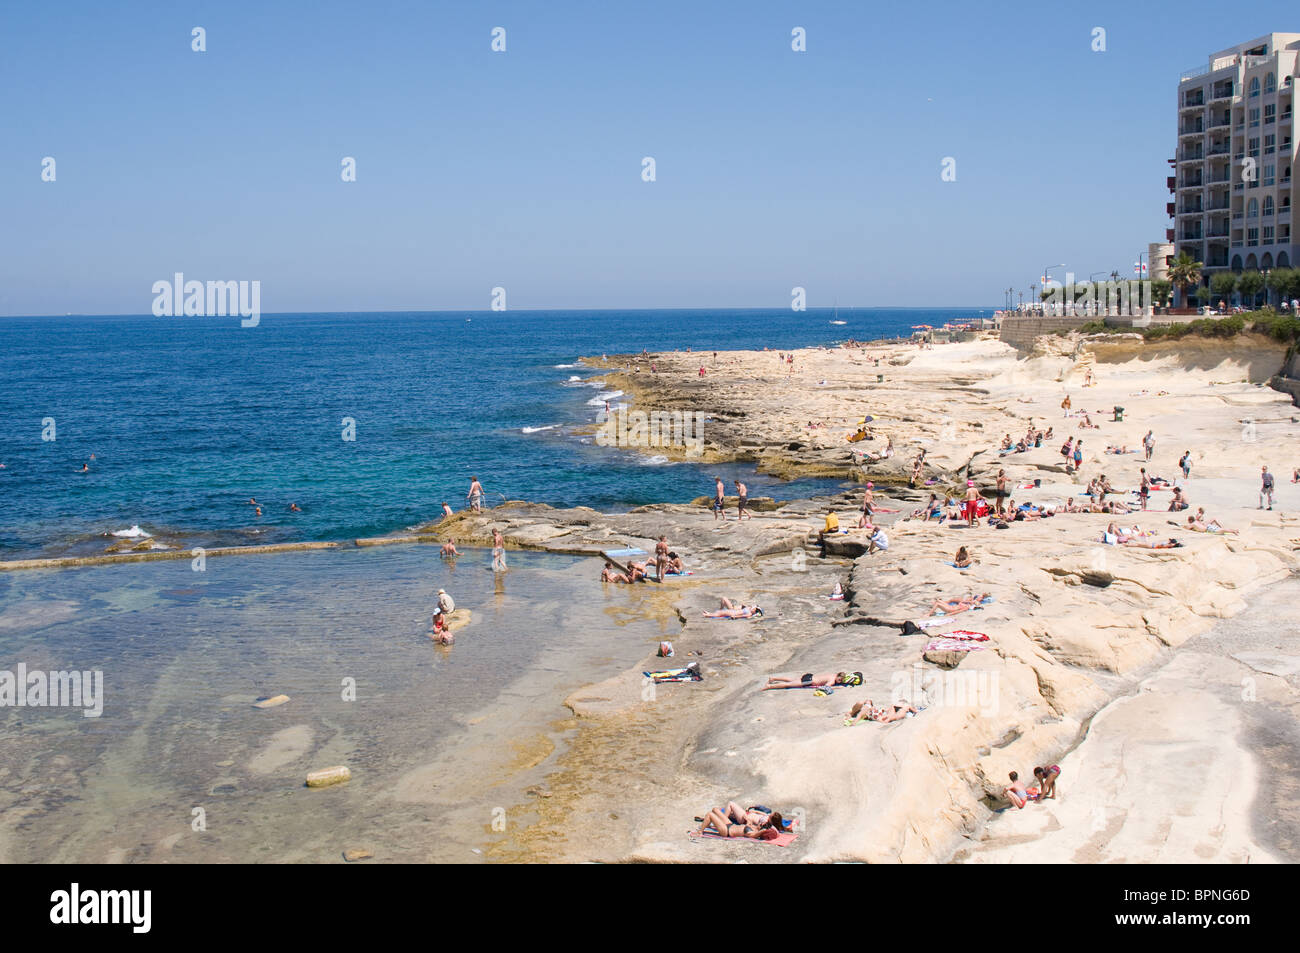 Sunbathers relax on the rocky beach in Sliema , Malta. On the left is a sea water pool that provides a safe area to splash about Stock Photo